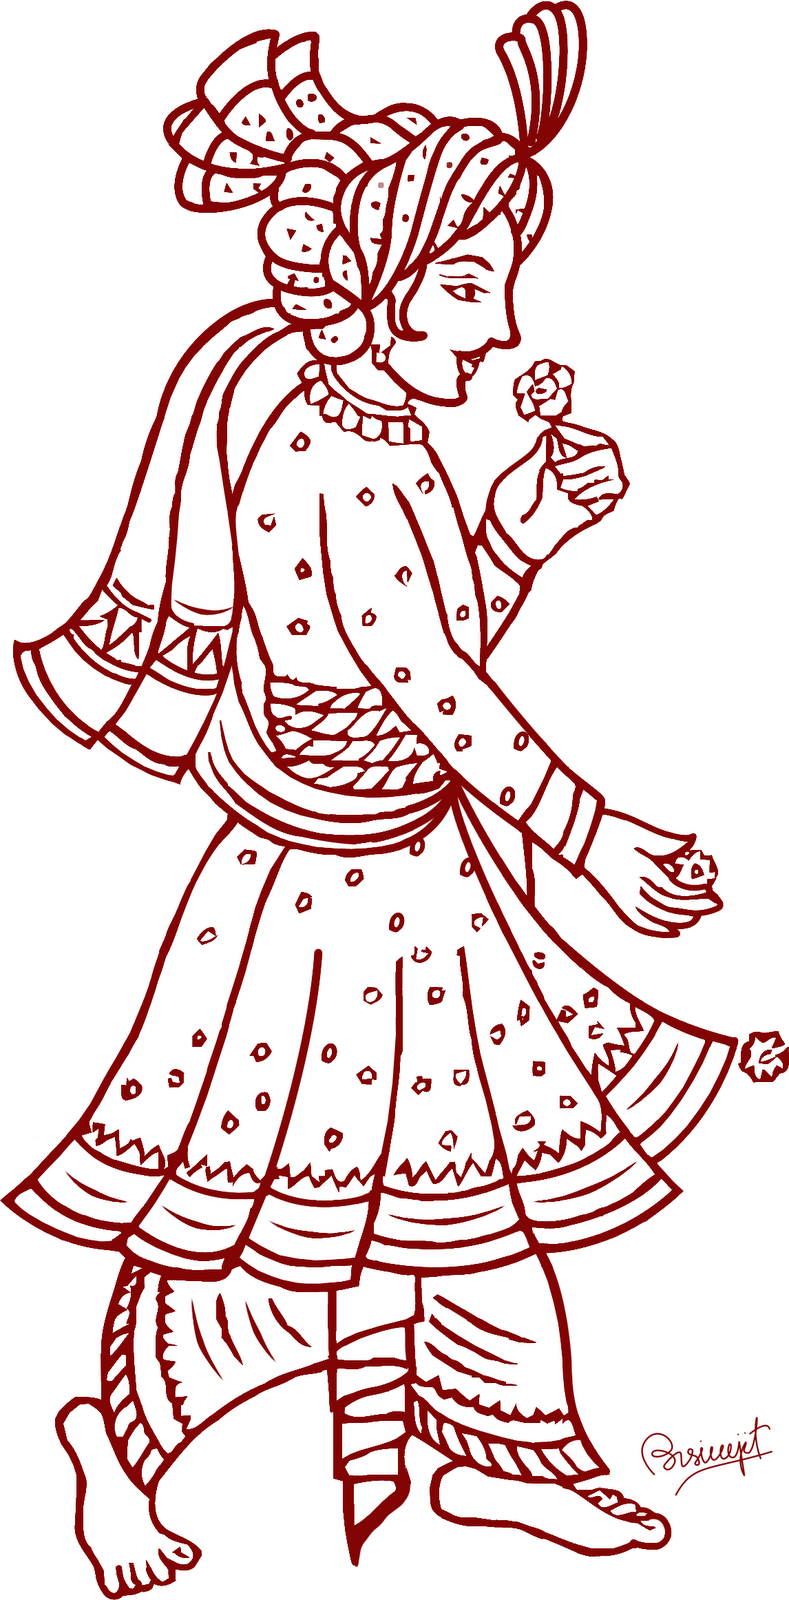 indian wedding clipart bride and groom